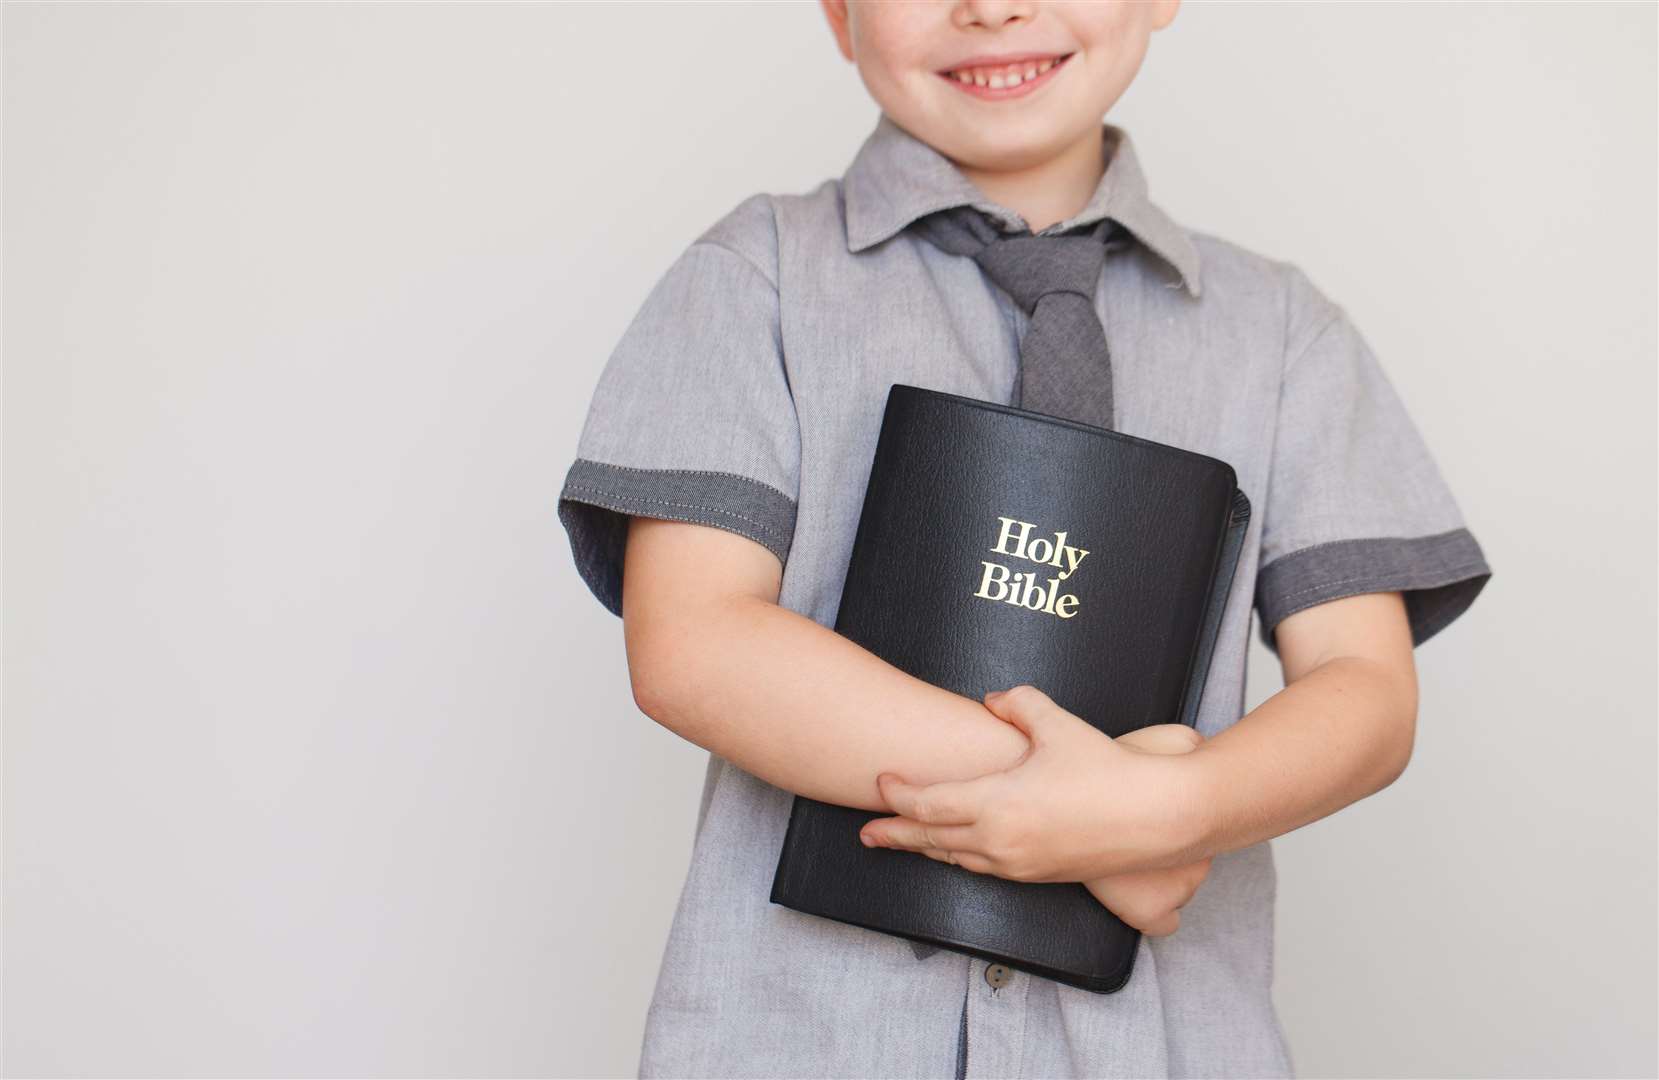 The Bible can guide us in so many ways. Stock photo